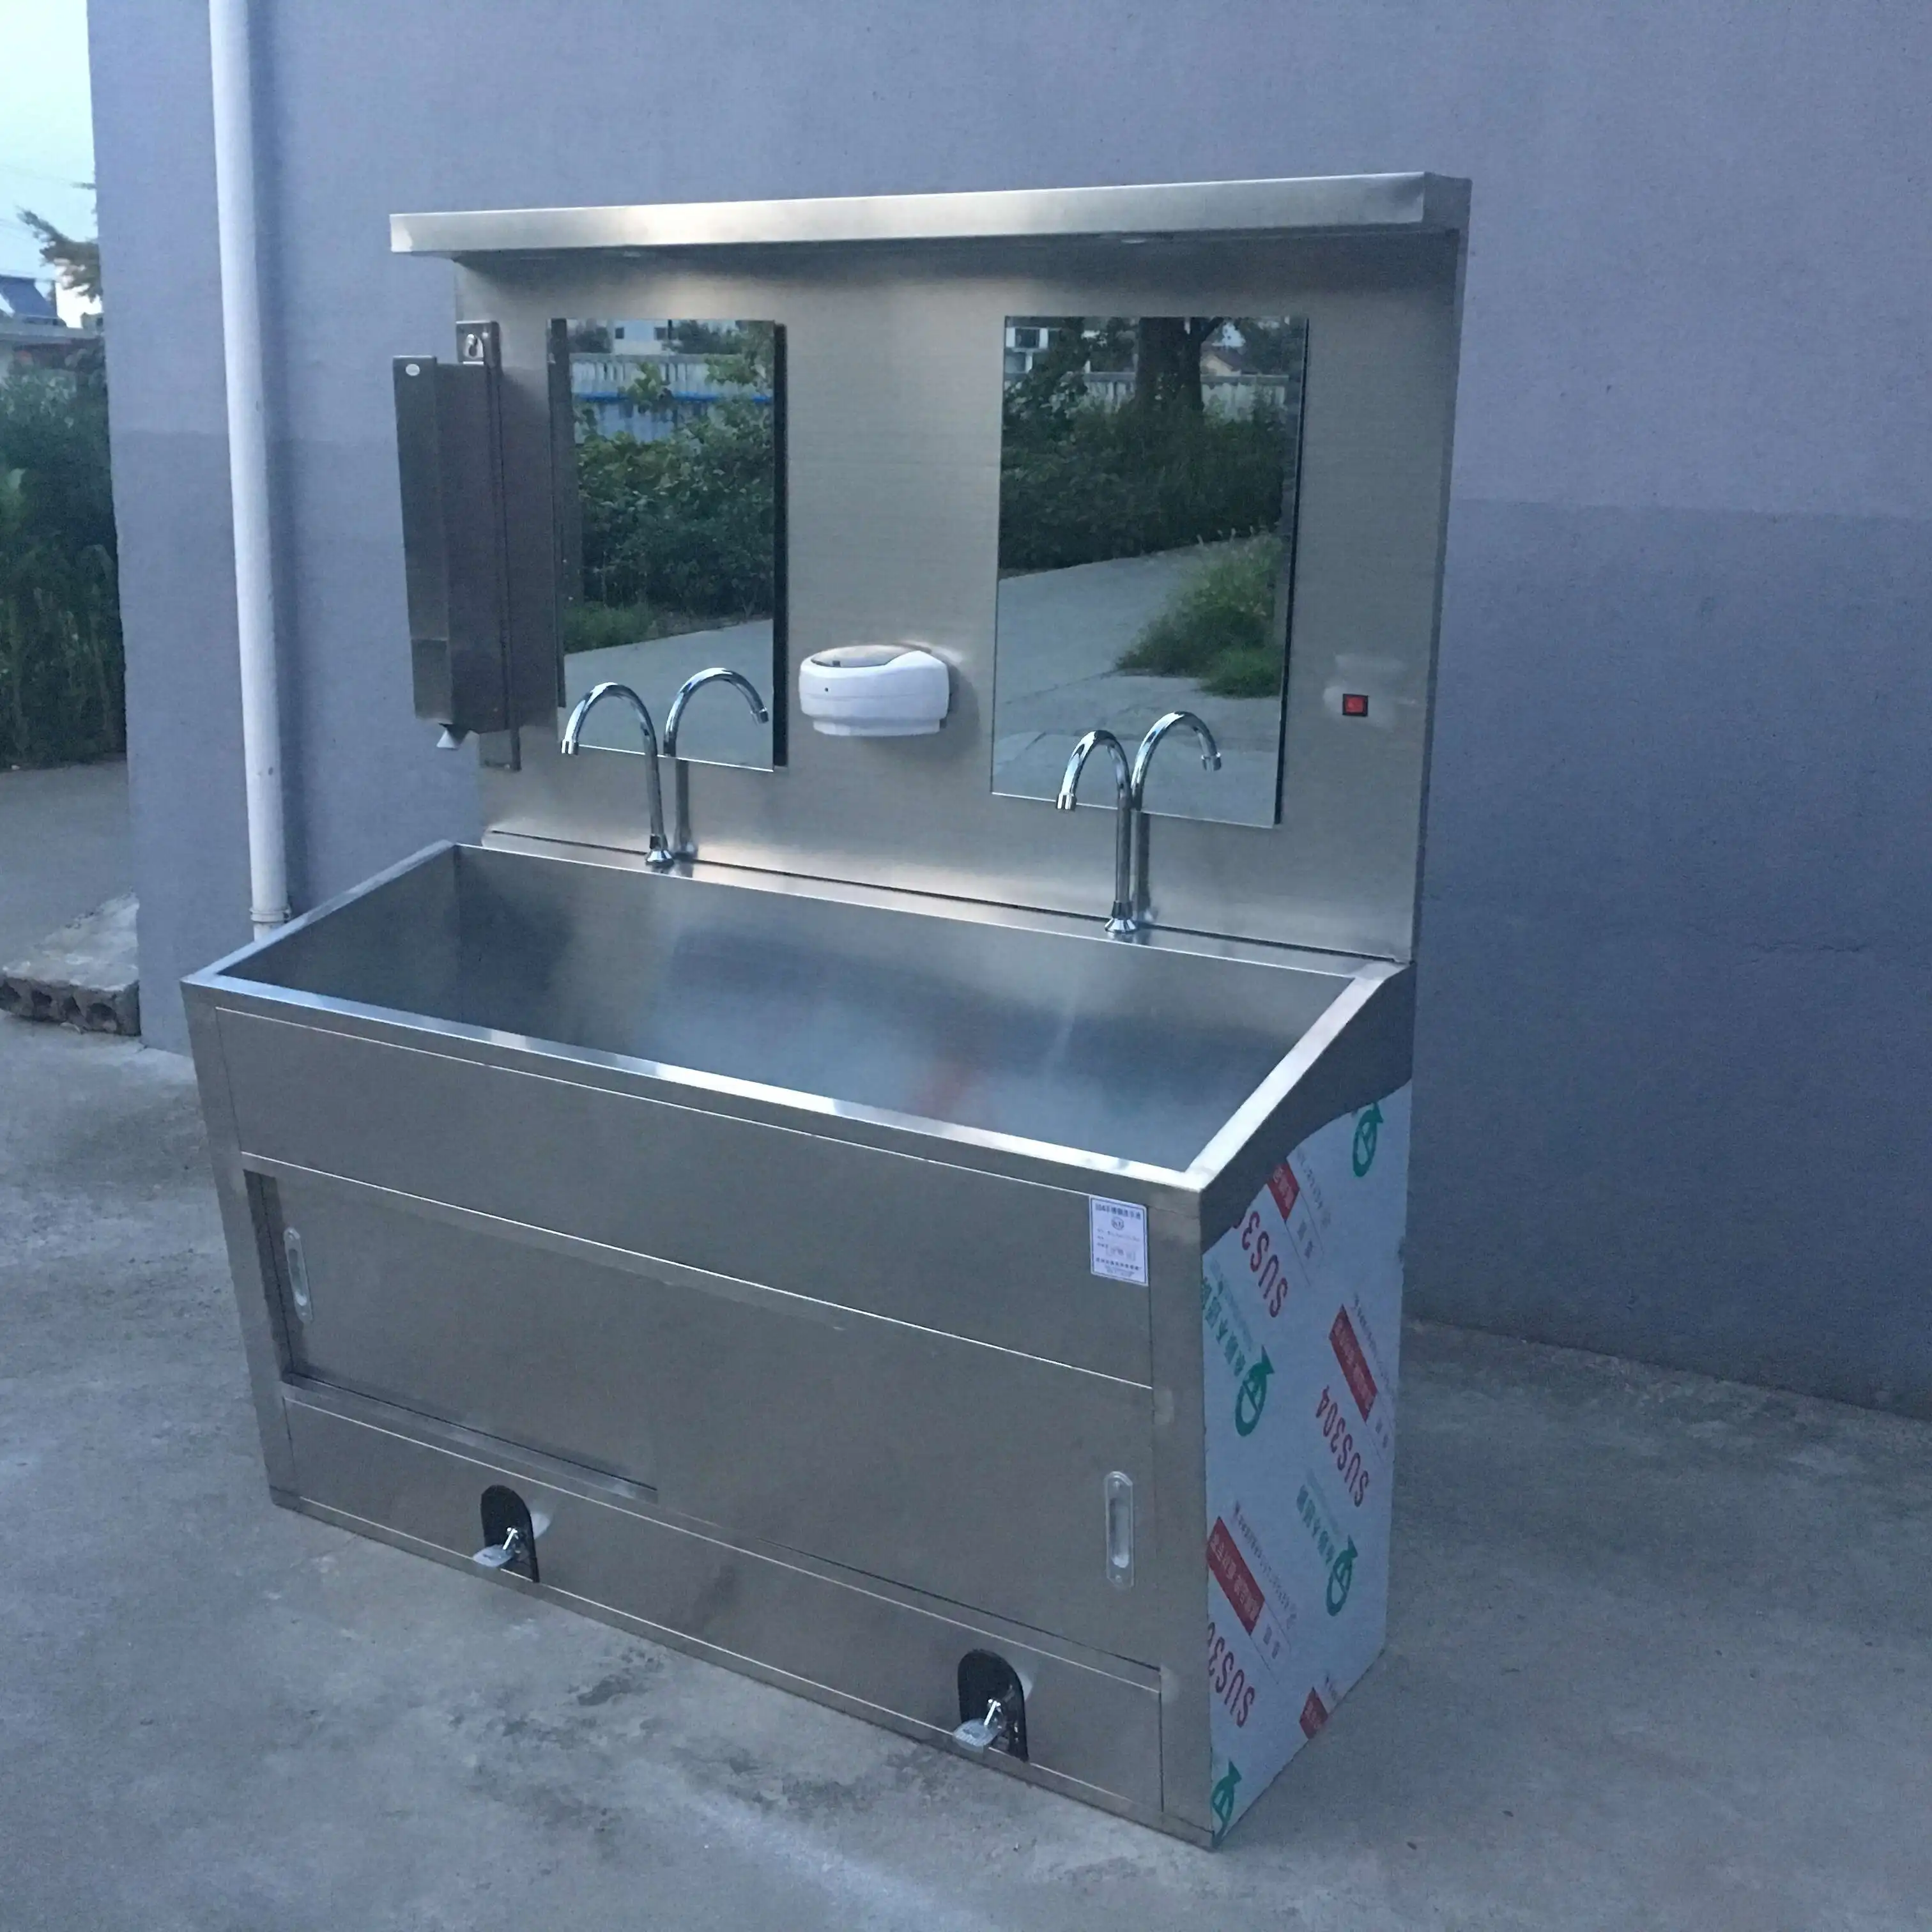 Ground type stainless steel medical wash basin hospital sink for cleaning instrument